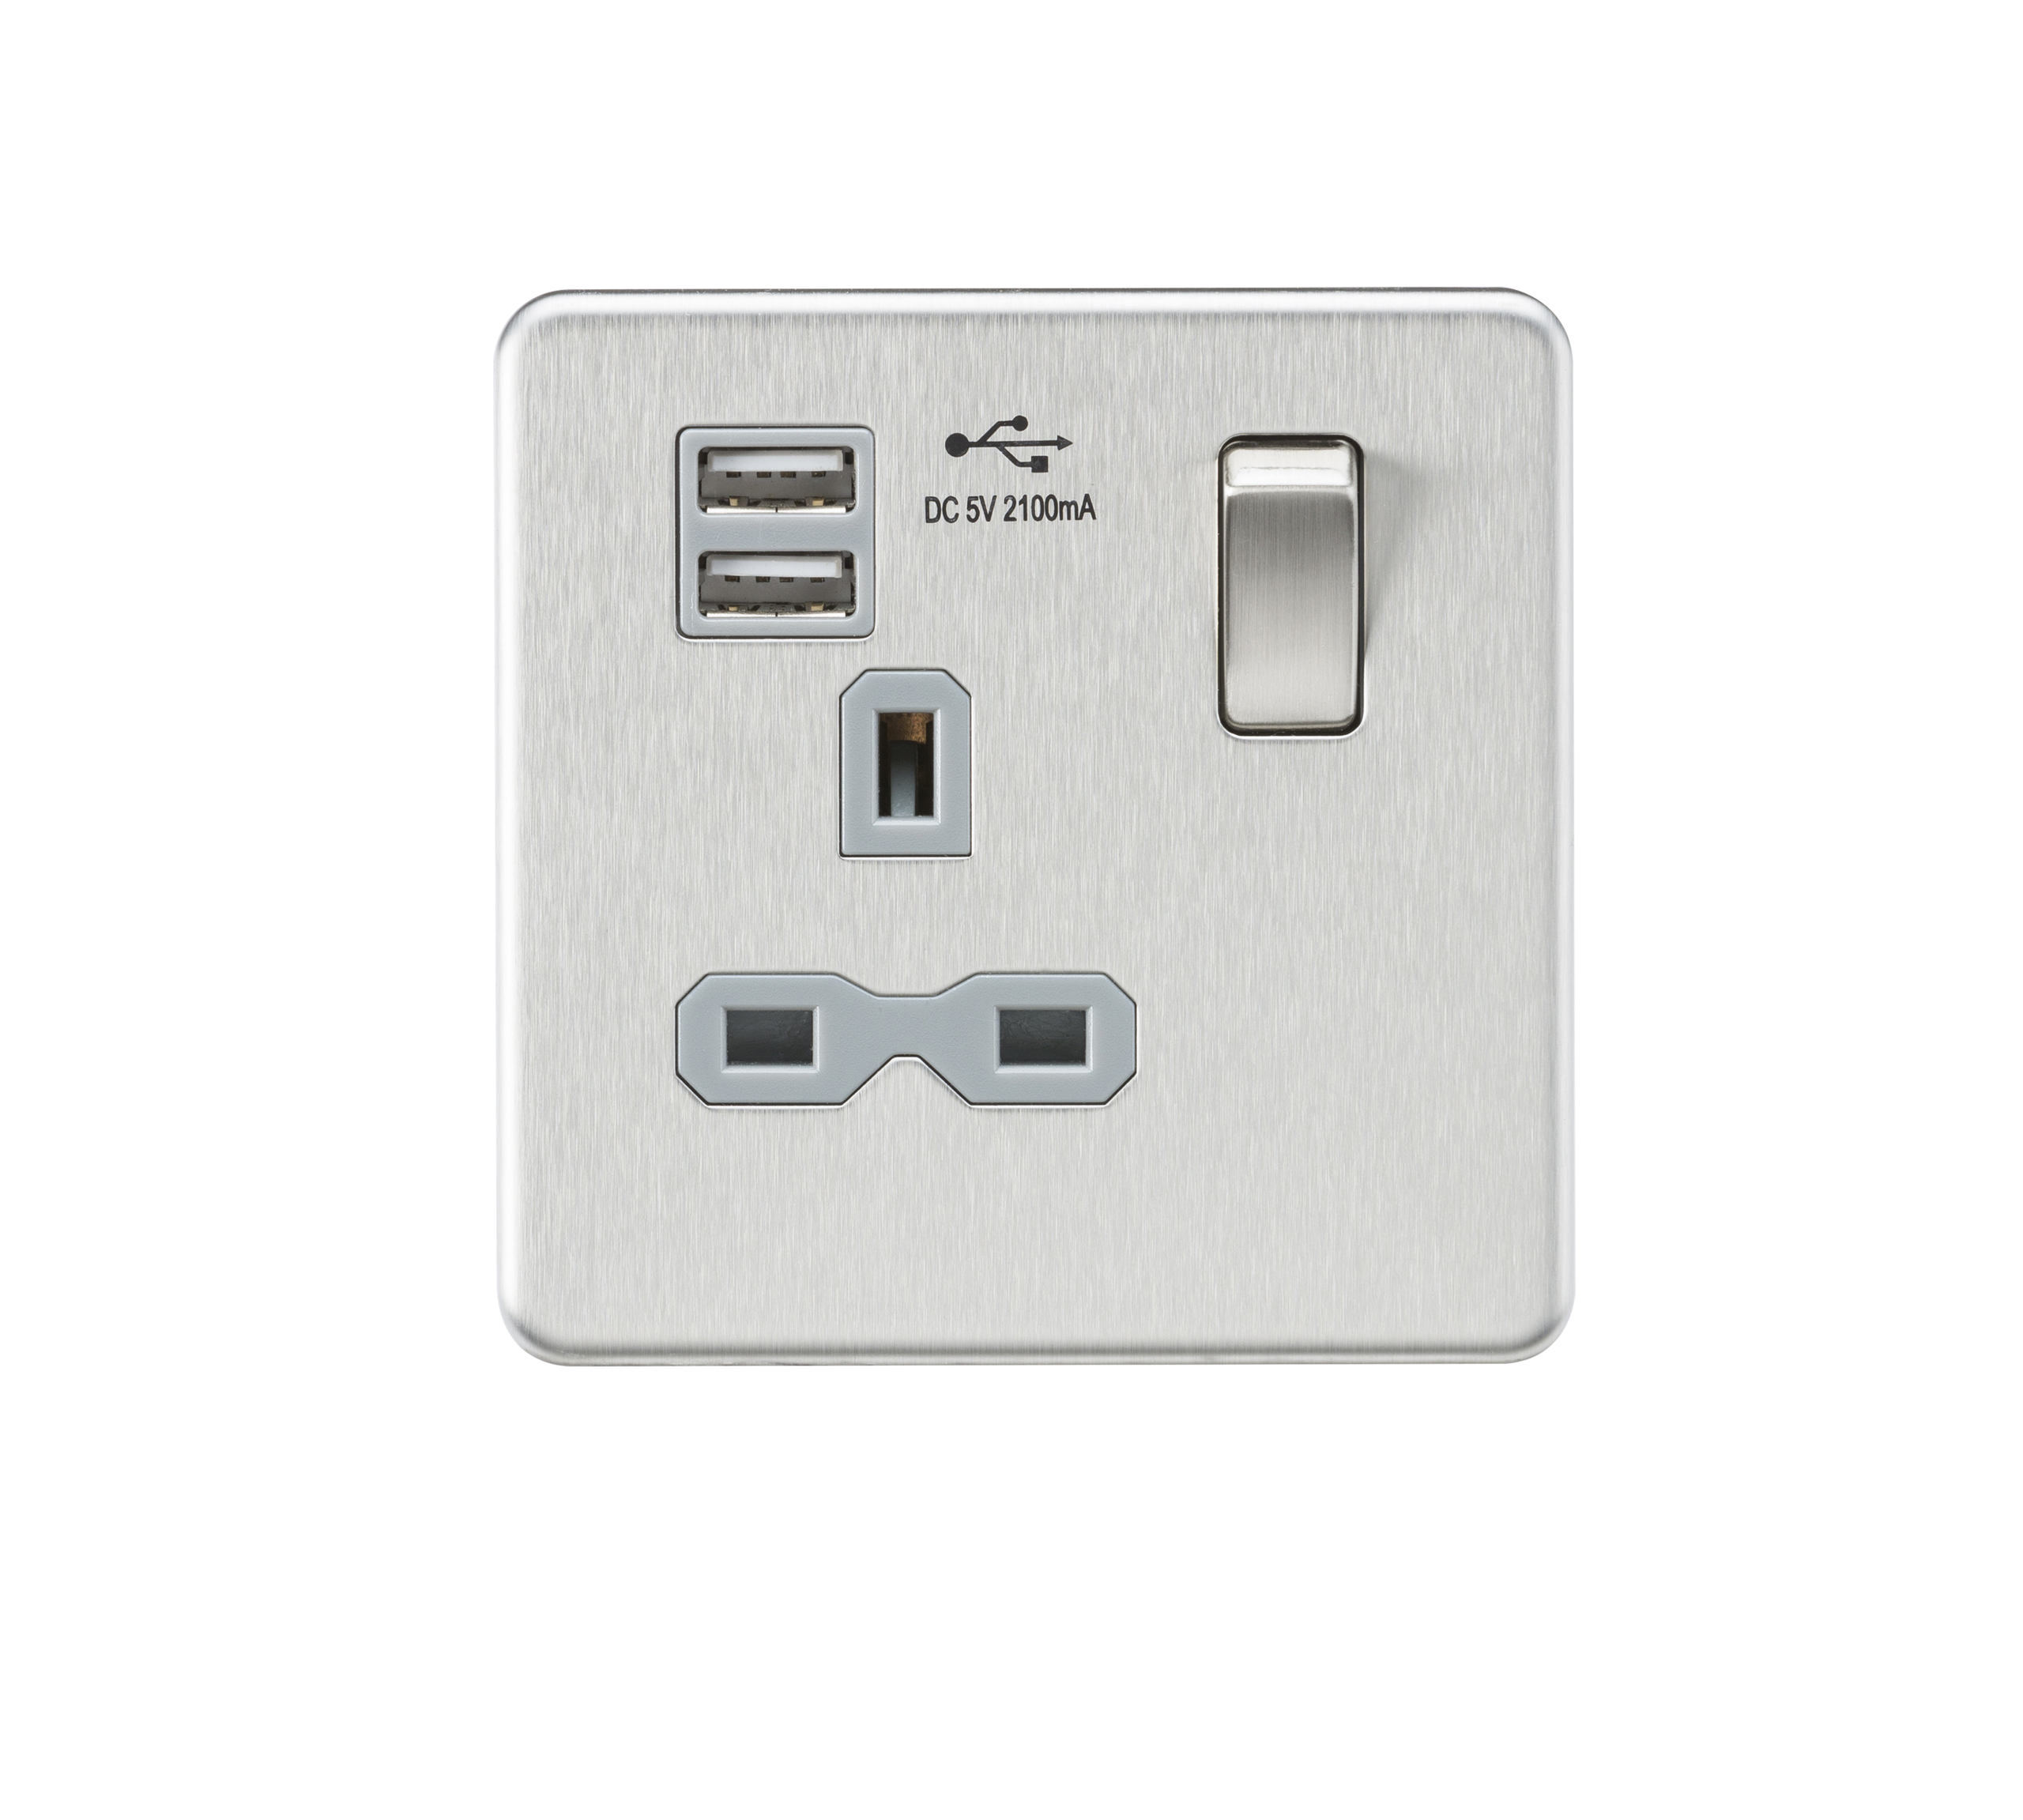 Screwless 13A 1G Switched Socket With Dual USB Charger (2.1A) - Brushed Chrome With Grey Insert - SFR9901BCG 